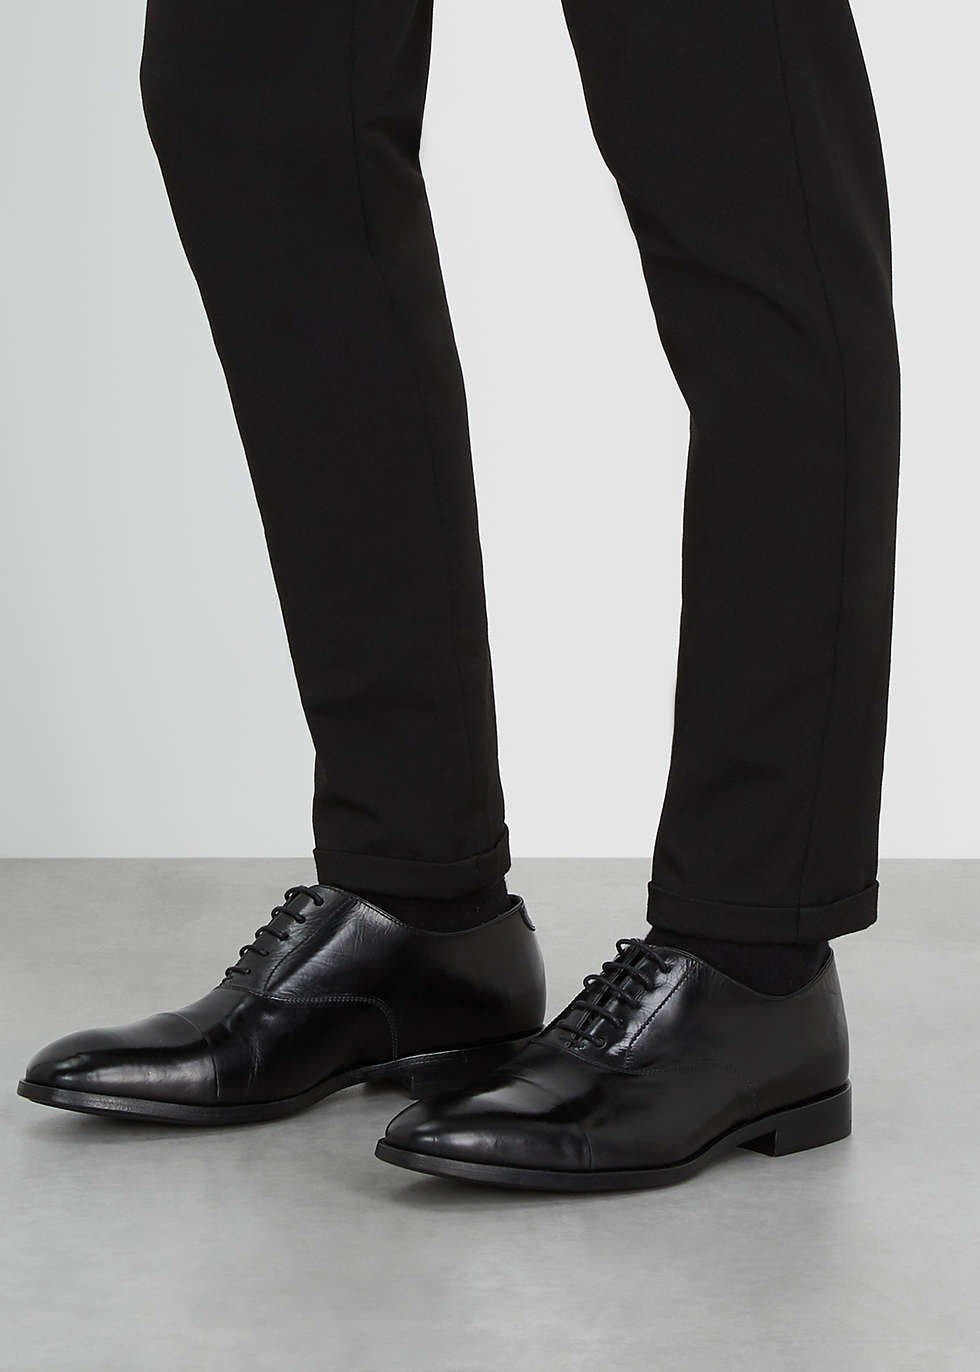 Paul Smith Brent black leather Oxford 